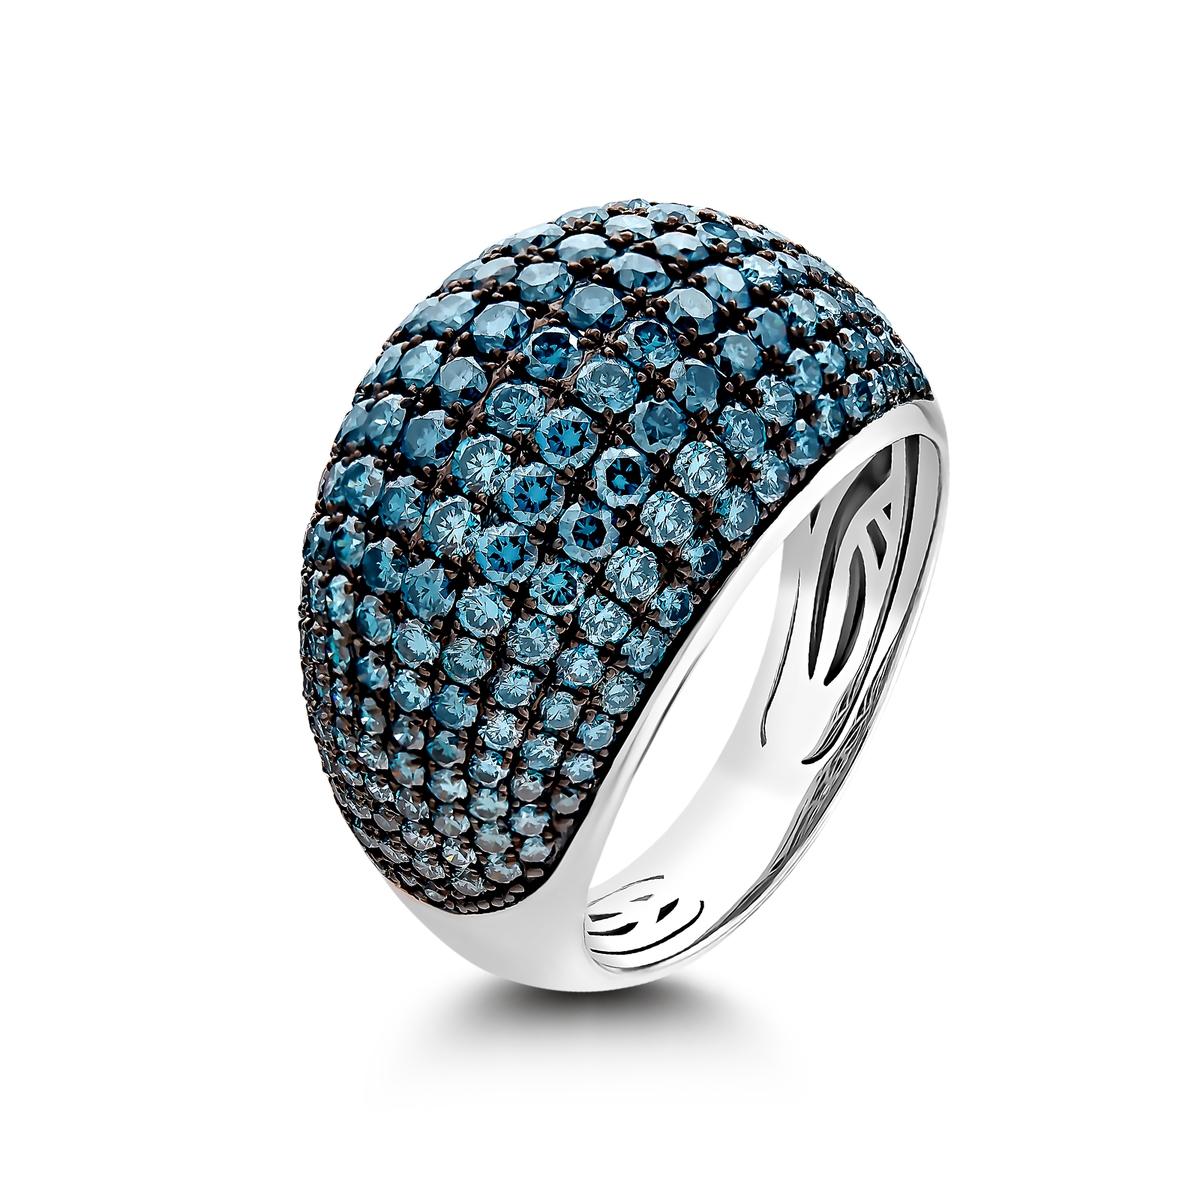 For Sale:  3 Carat Blue Diamond Pave Dome Ring in 18K White Gold, Handmade in New York 2